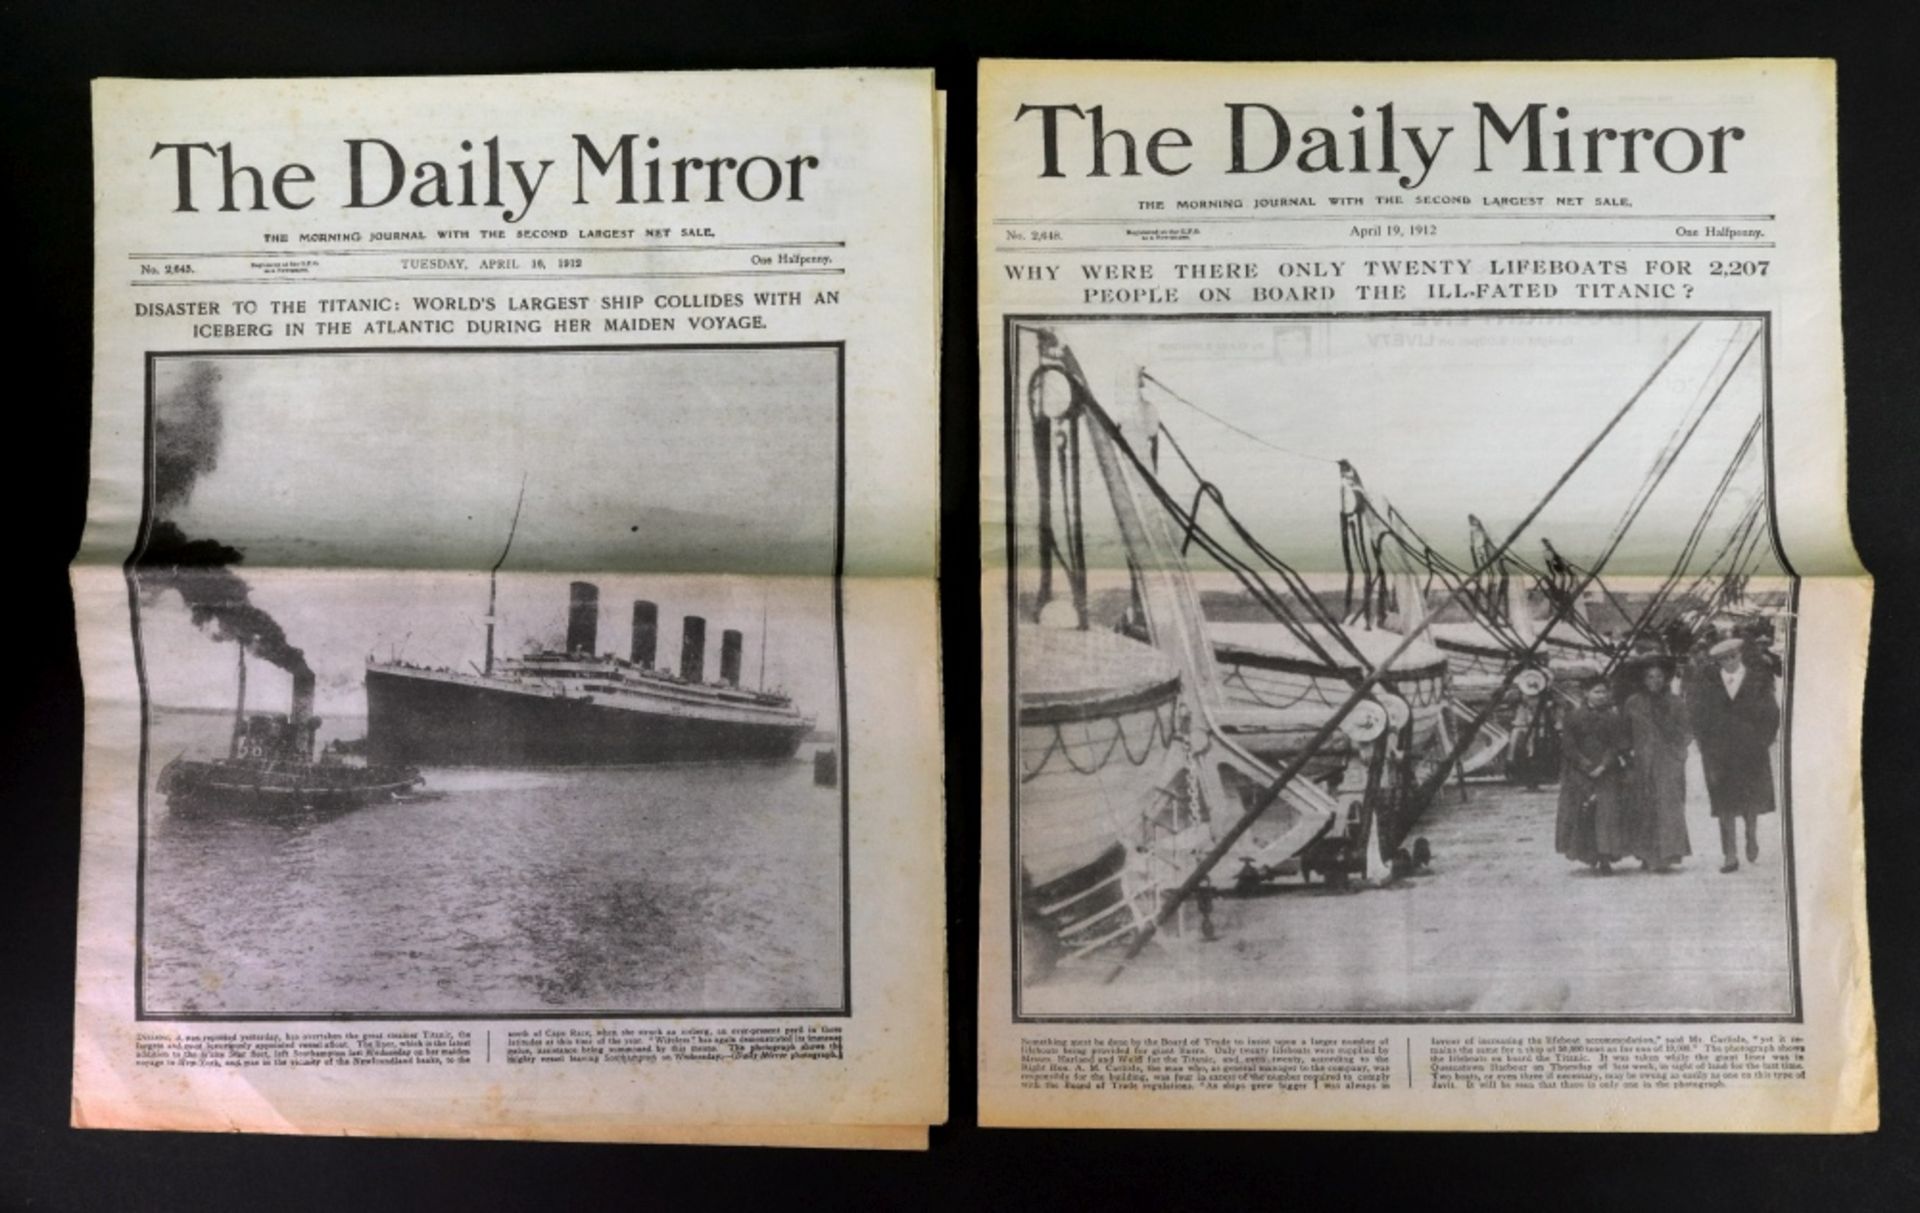 Titanic Interest; The Daily Mirror, Tuesday, April 16, 1912 and April 19, 1912 (2).